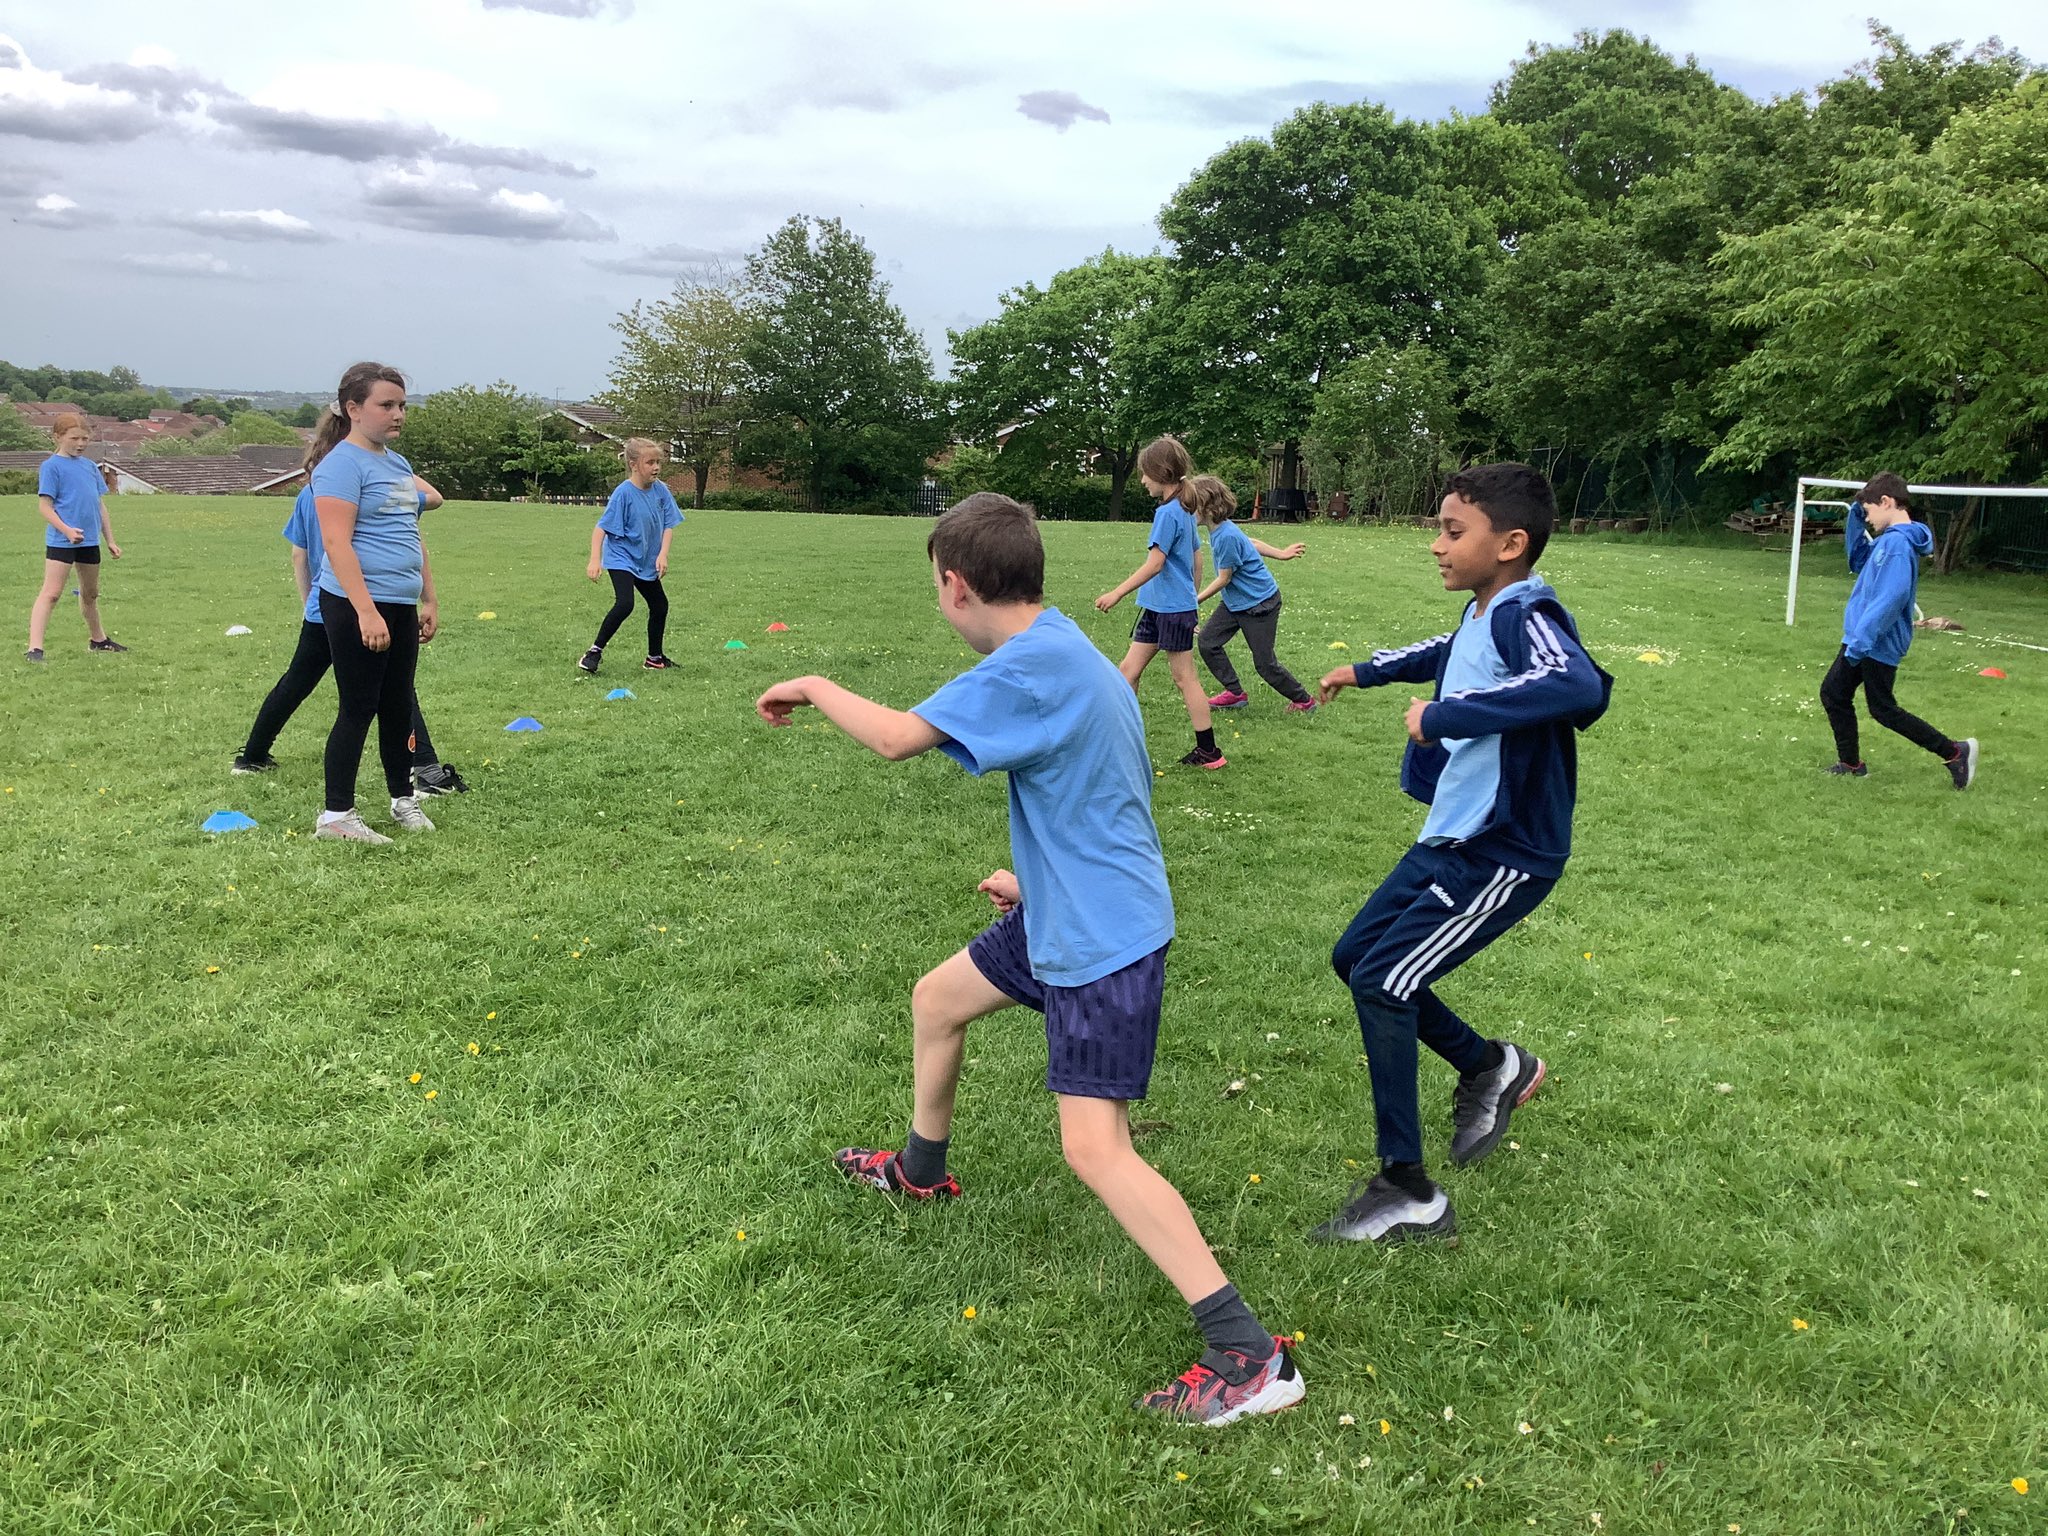 Flag Tag • Physical Education Games